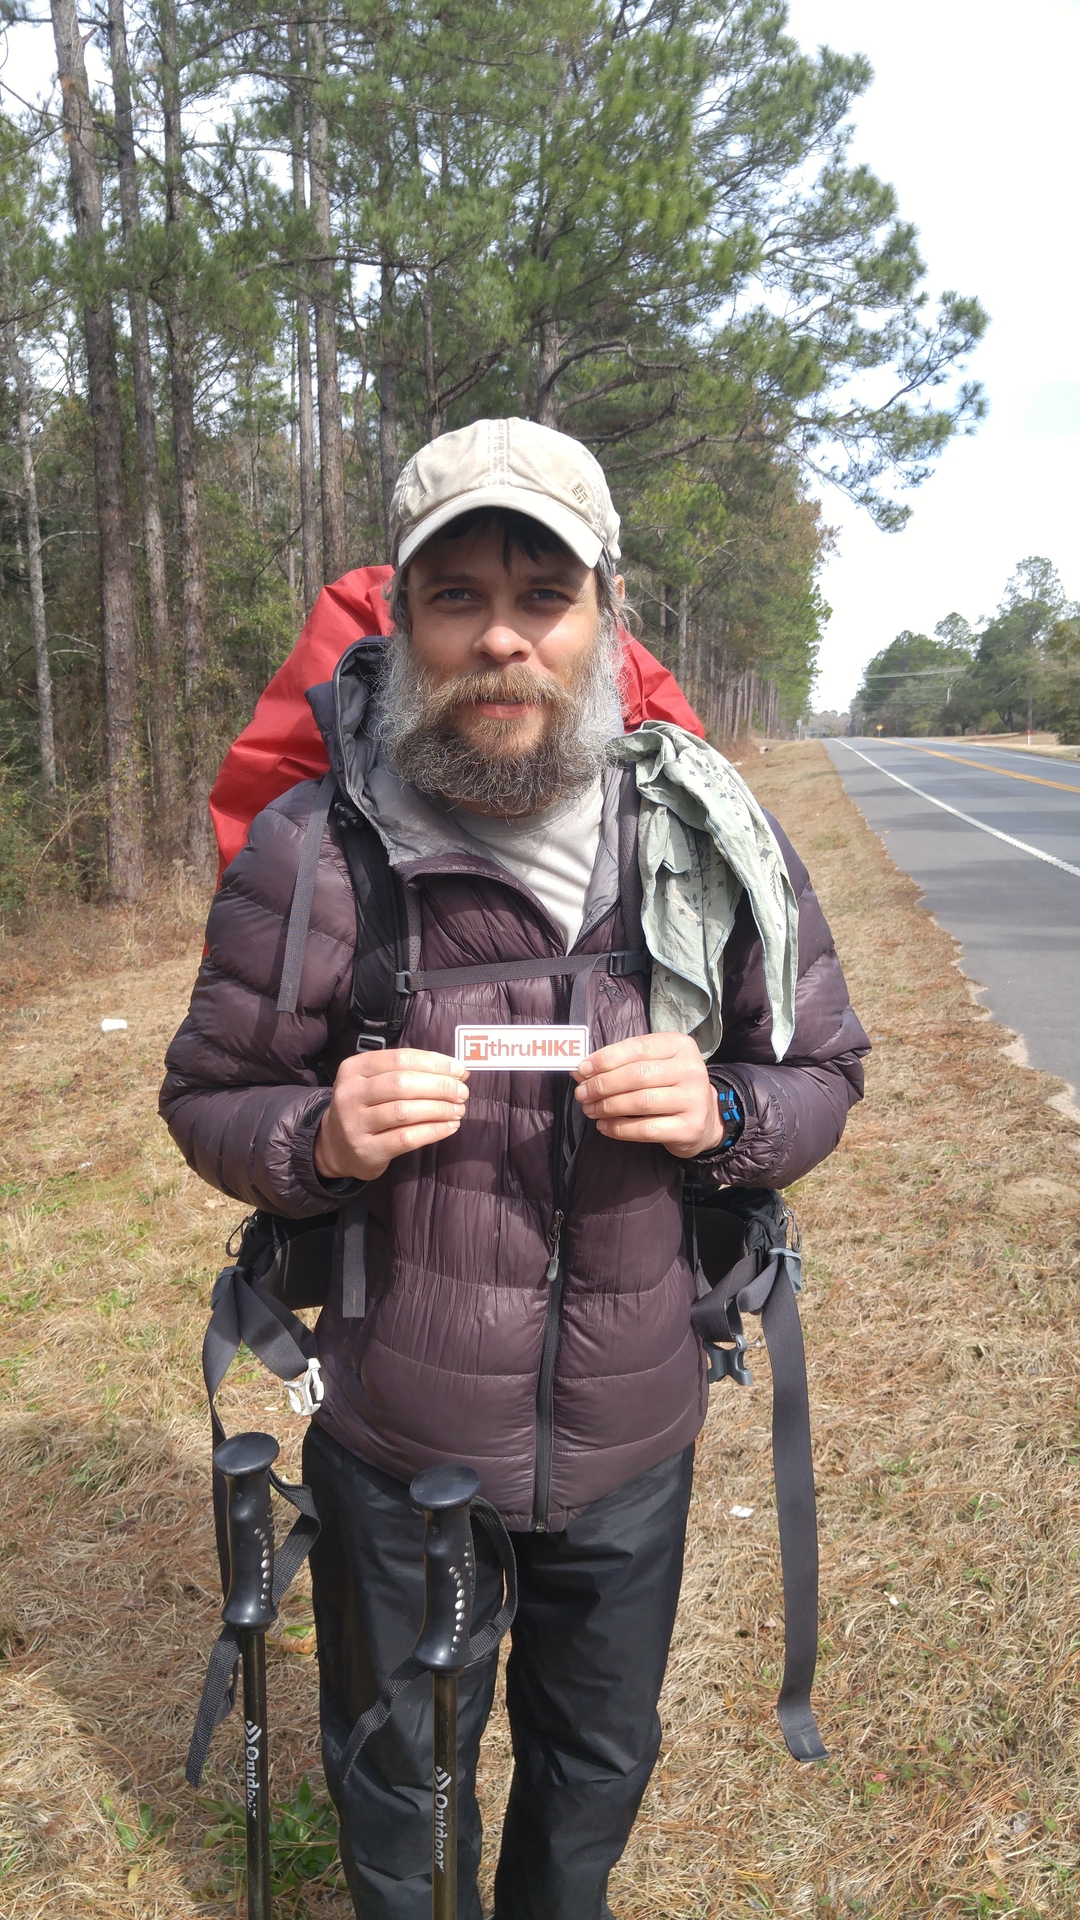 A photo of the hiker who called himself 